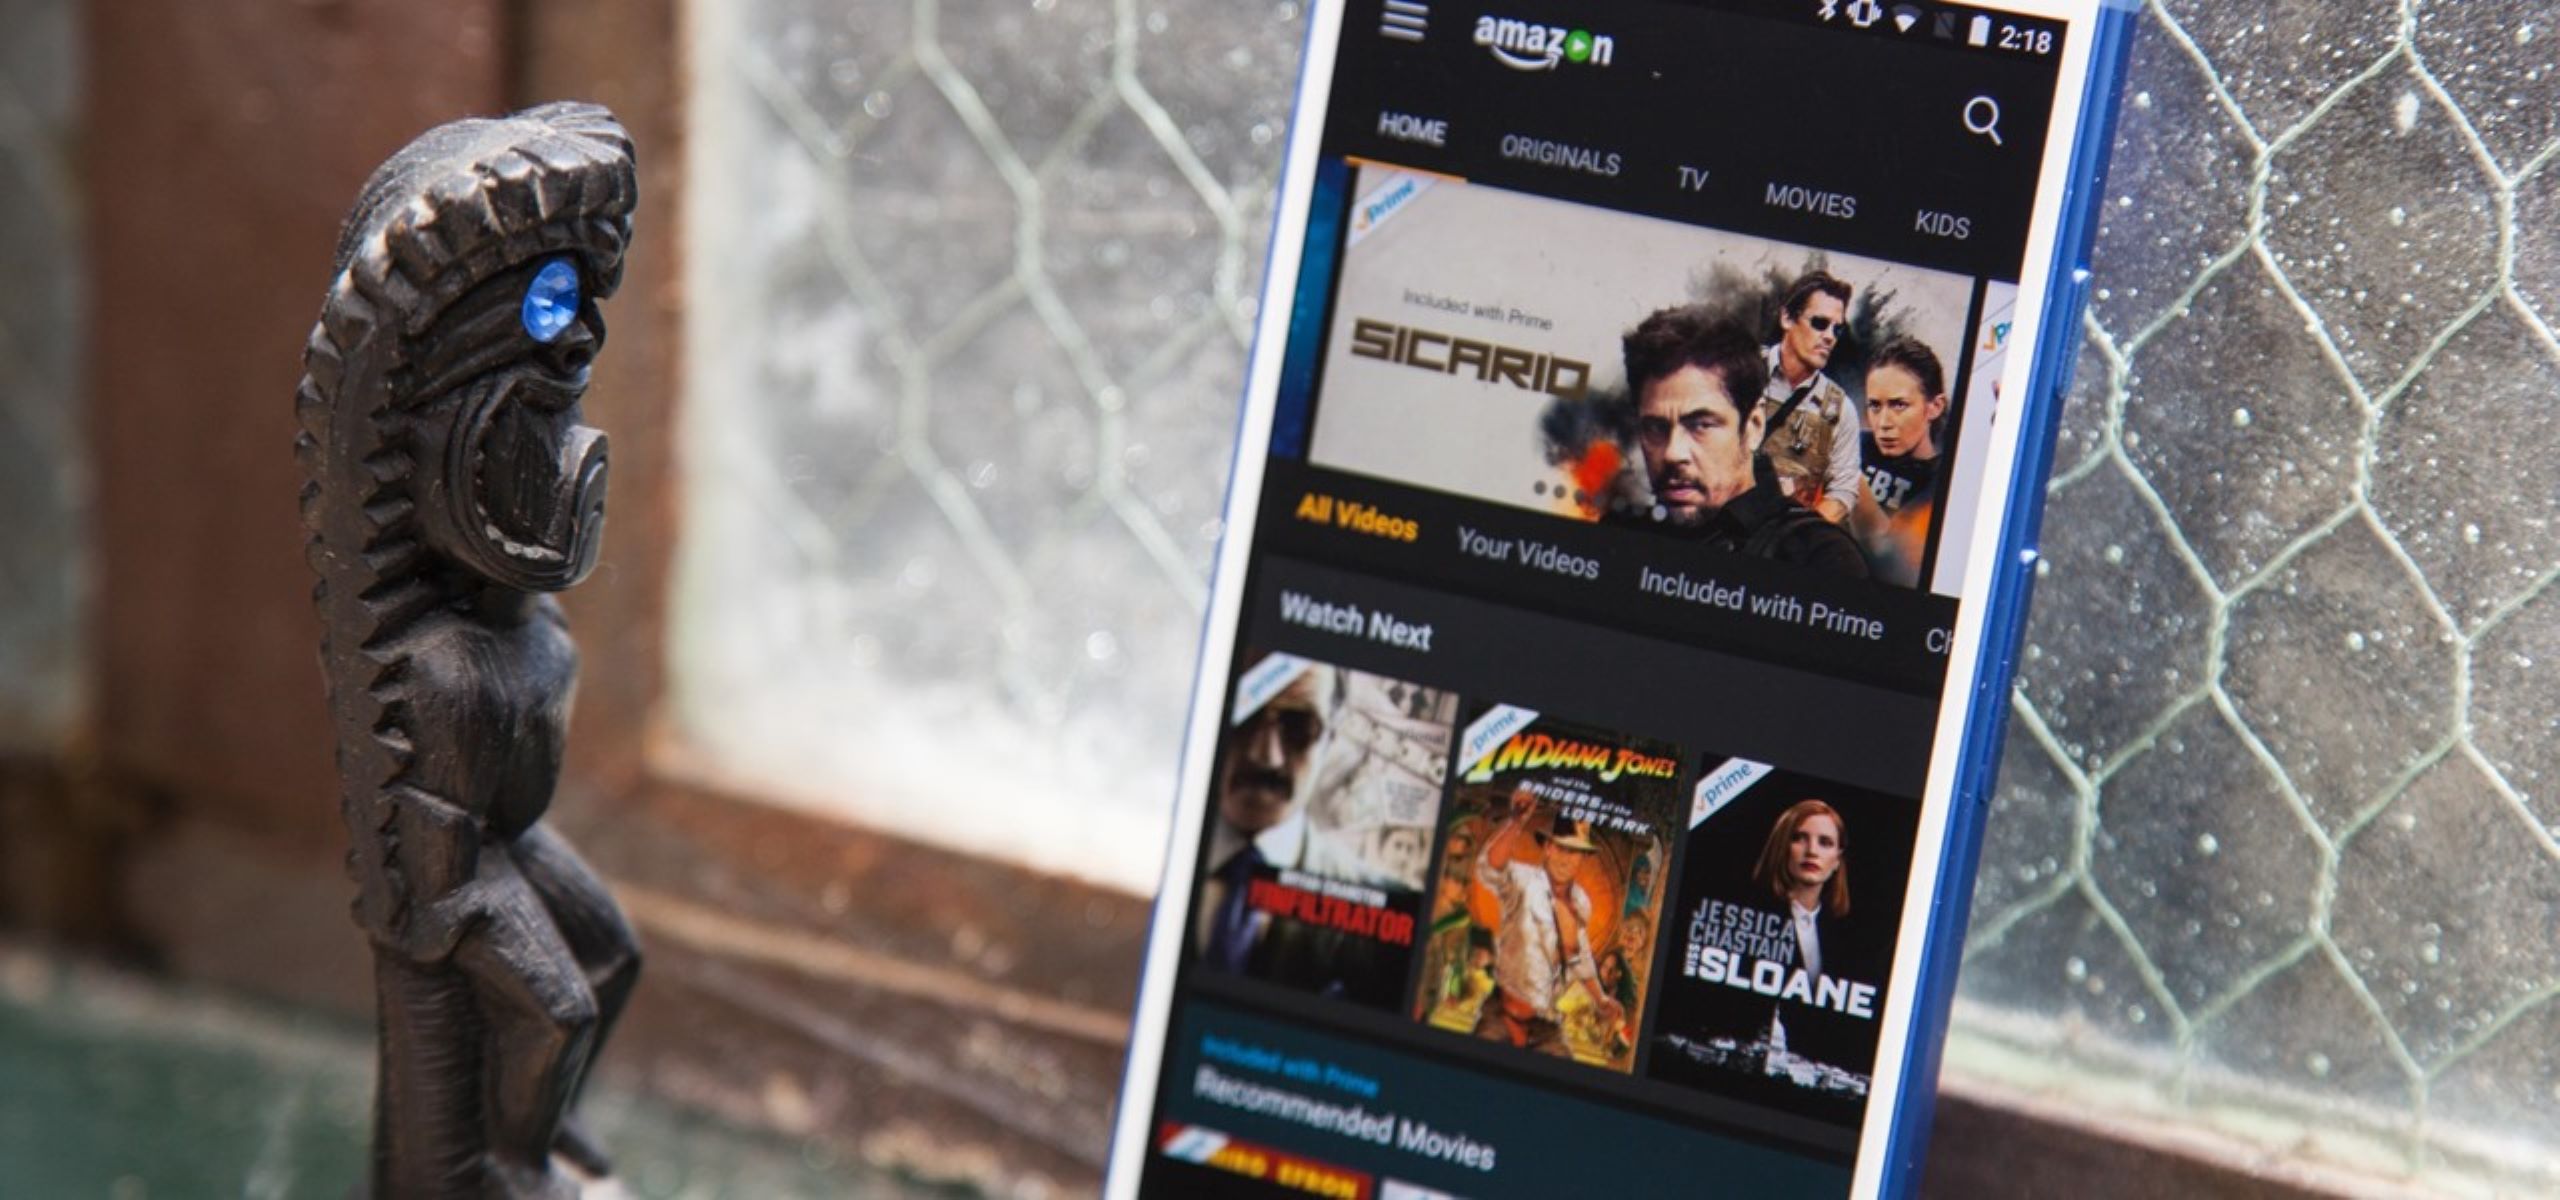 How To Watch Prime Instant Video On Android